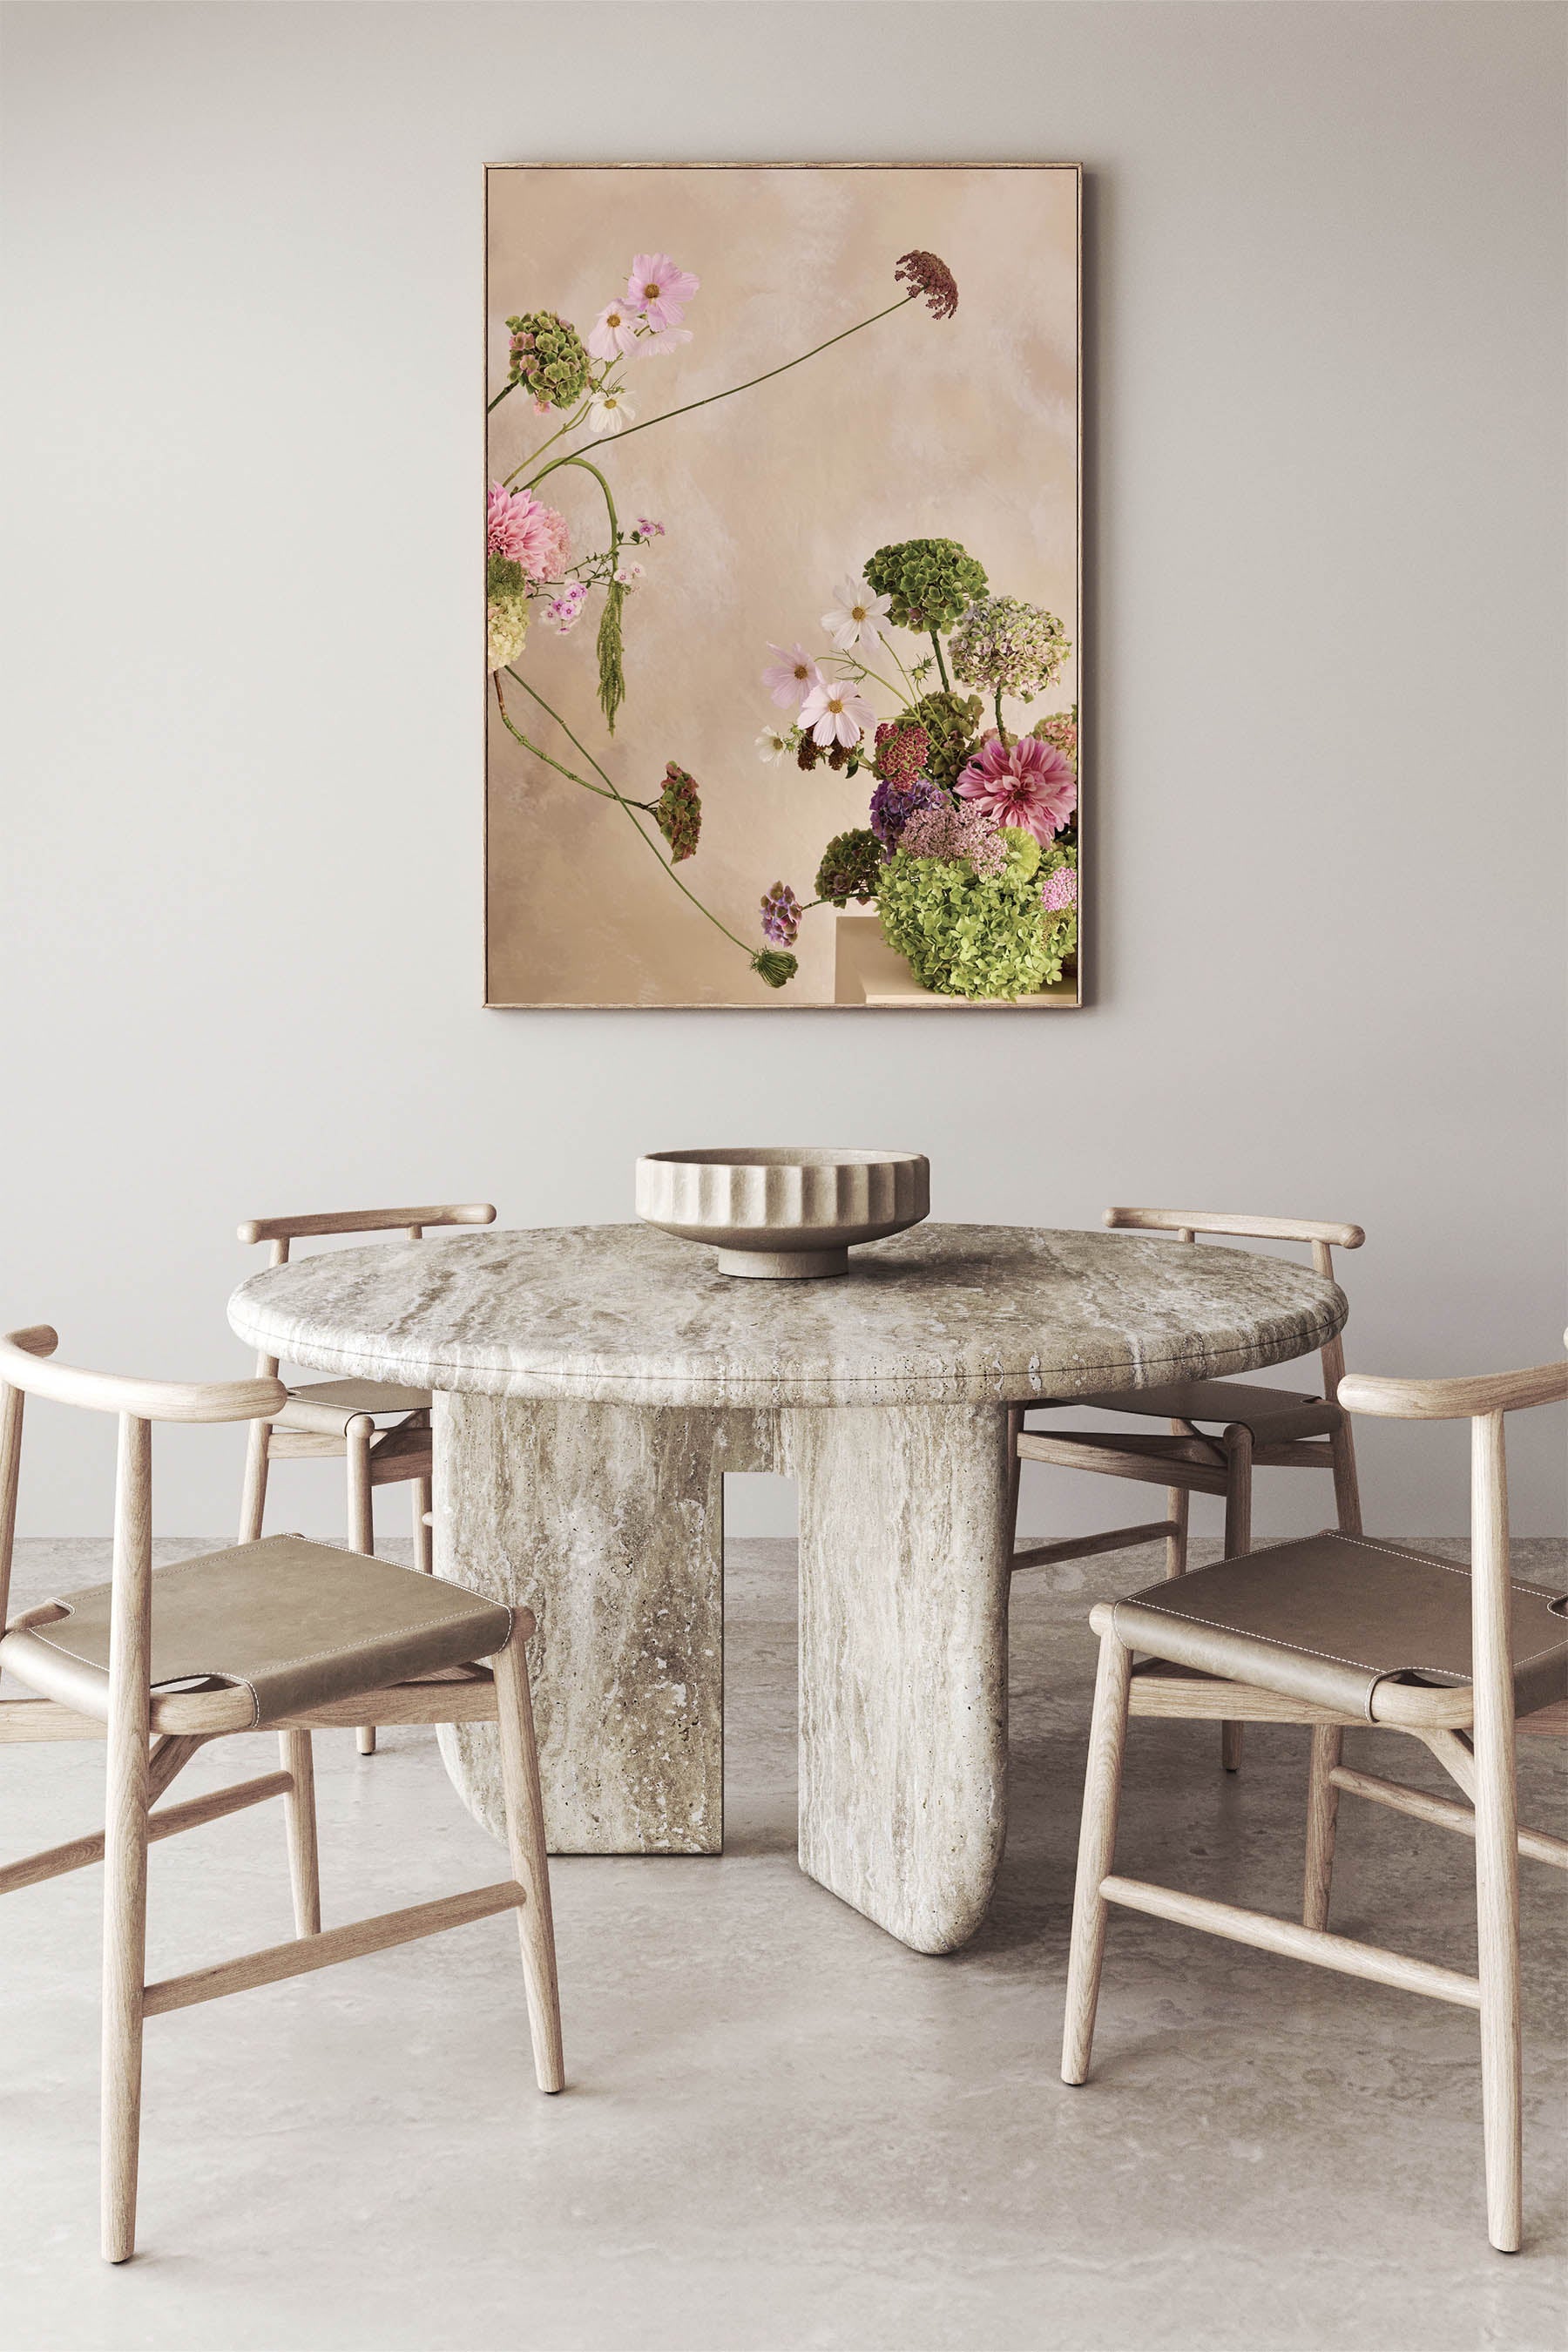 Whimsical Floral Abstract Arrangement against a Linen colour hand painted background Fine Art Print By Austin Bloom in a modern dutch style dining room.